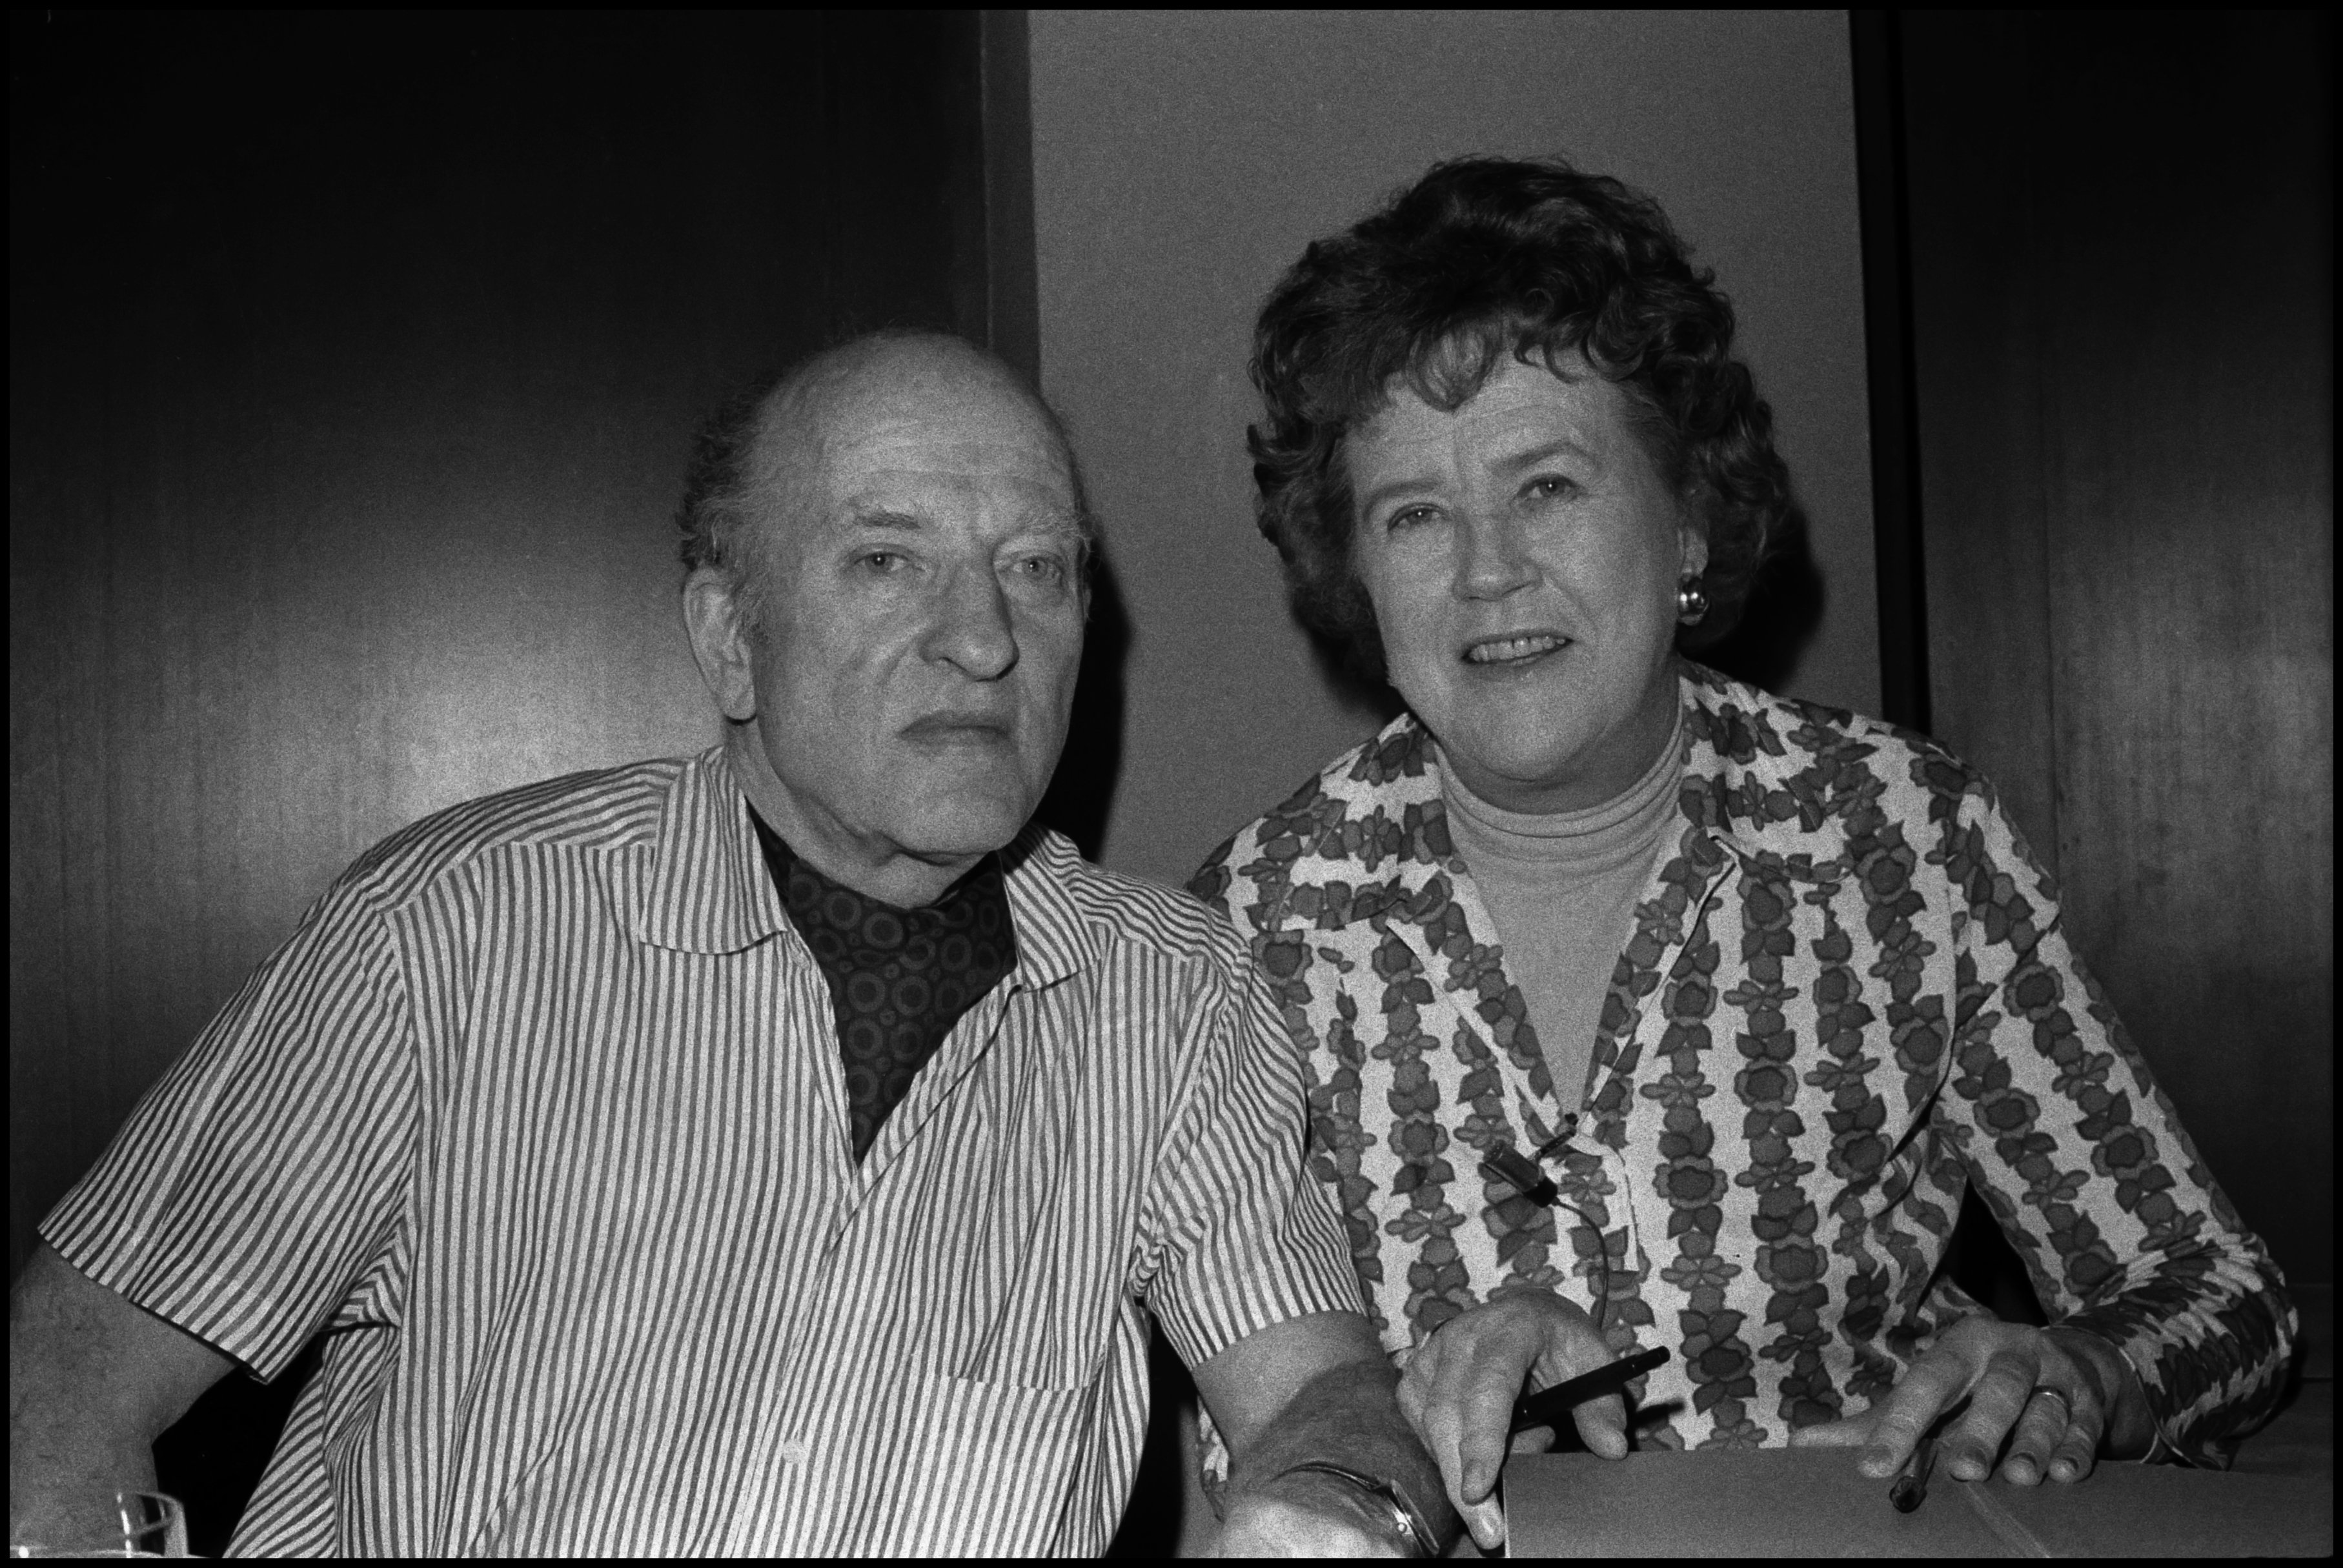 American former diplomat Paul Child and TV host Julia Child at the Kabuki Theatre on March 1974 in San Francisco, California. Photo: Getty Images